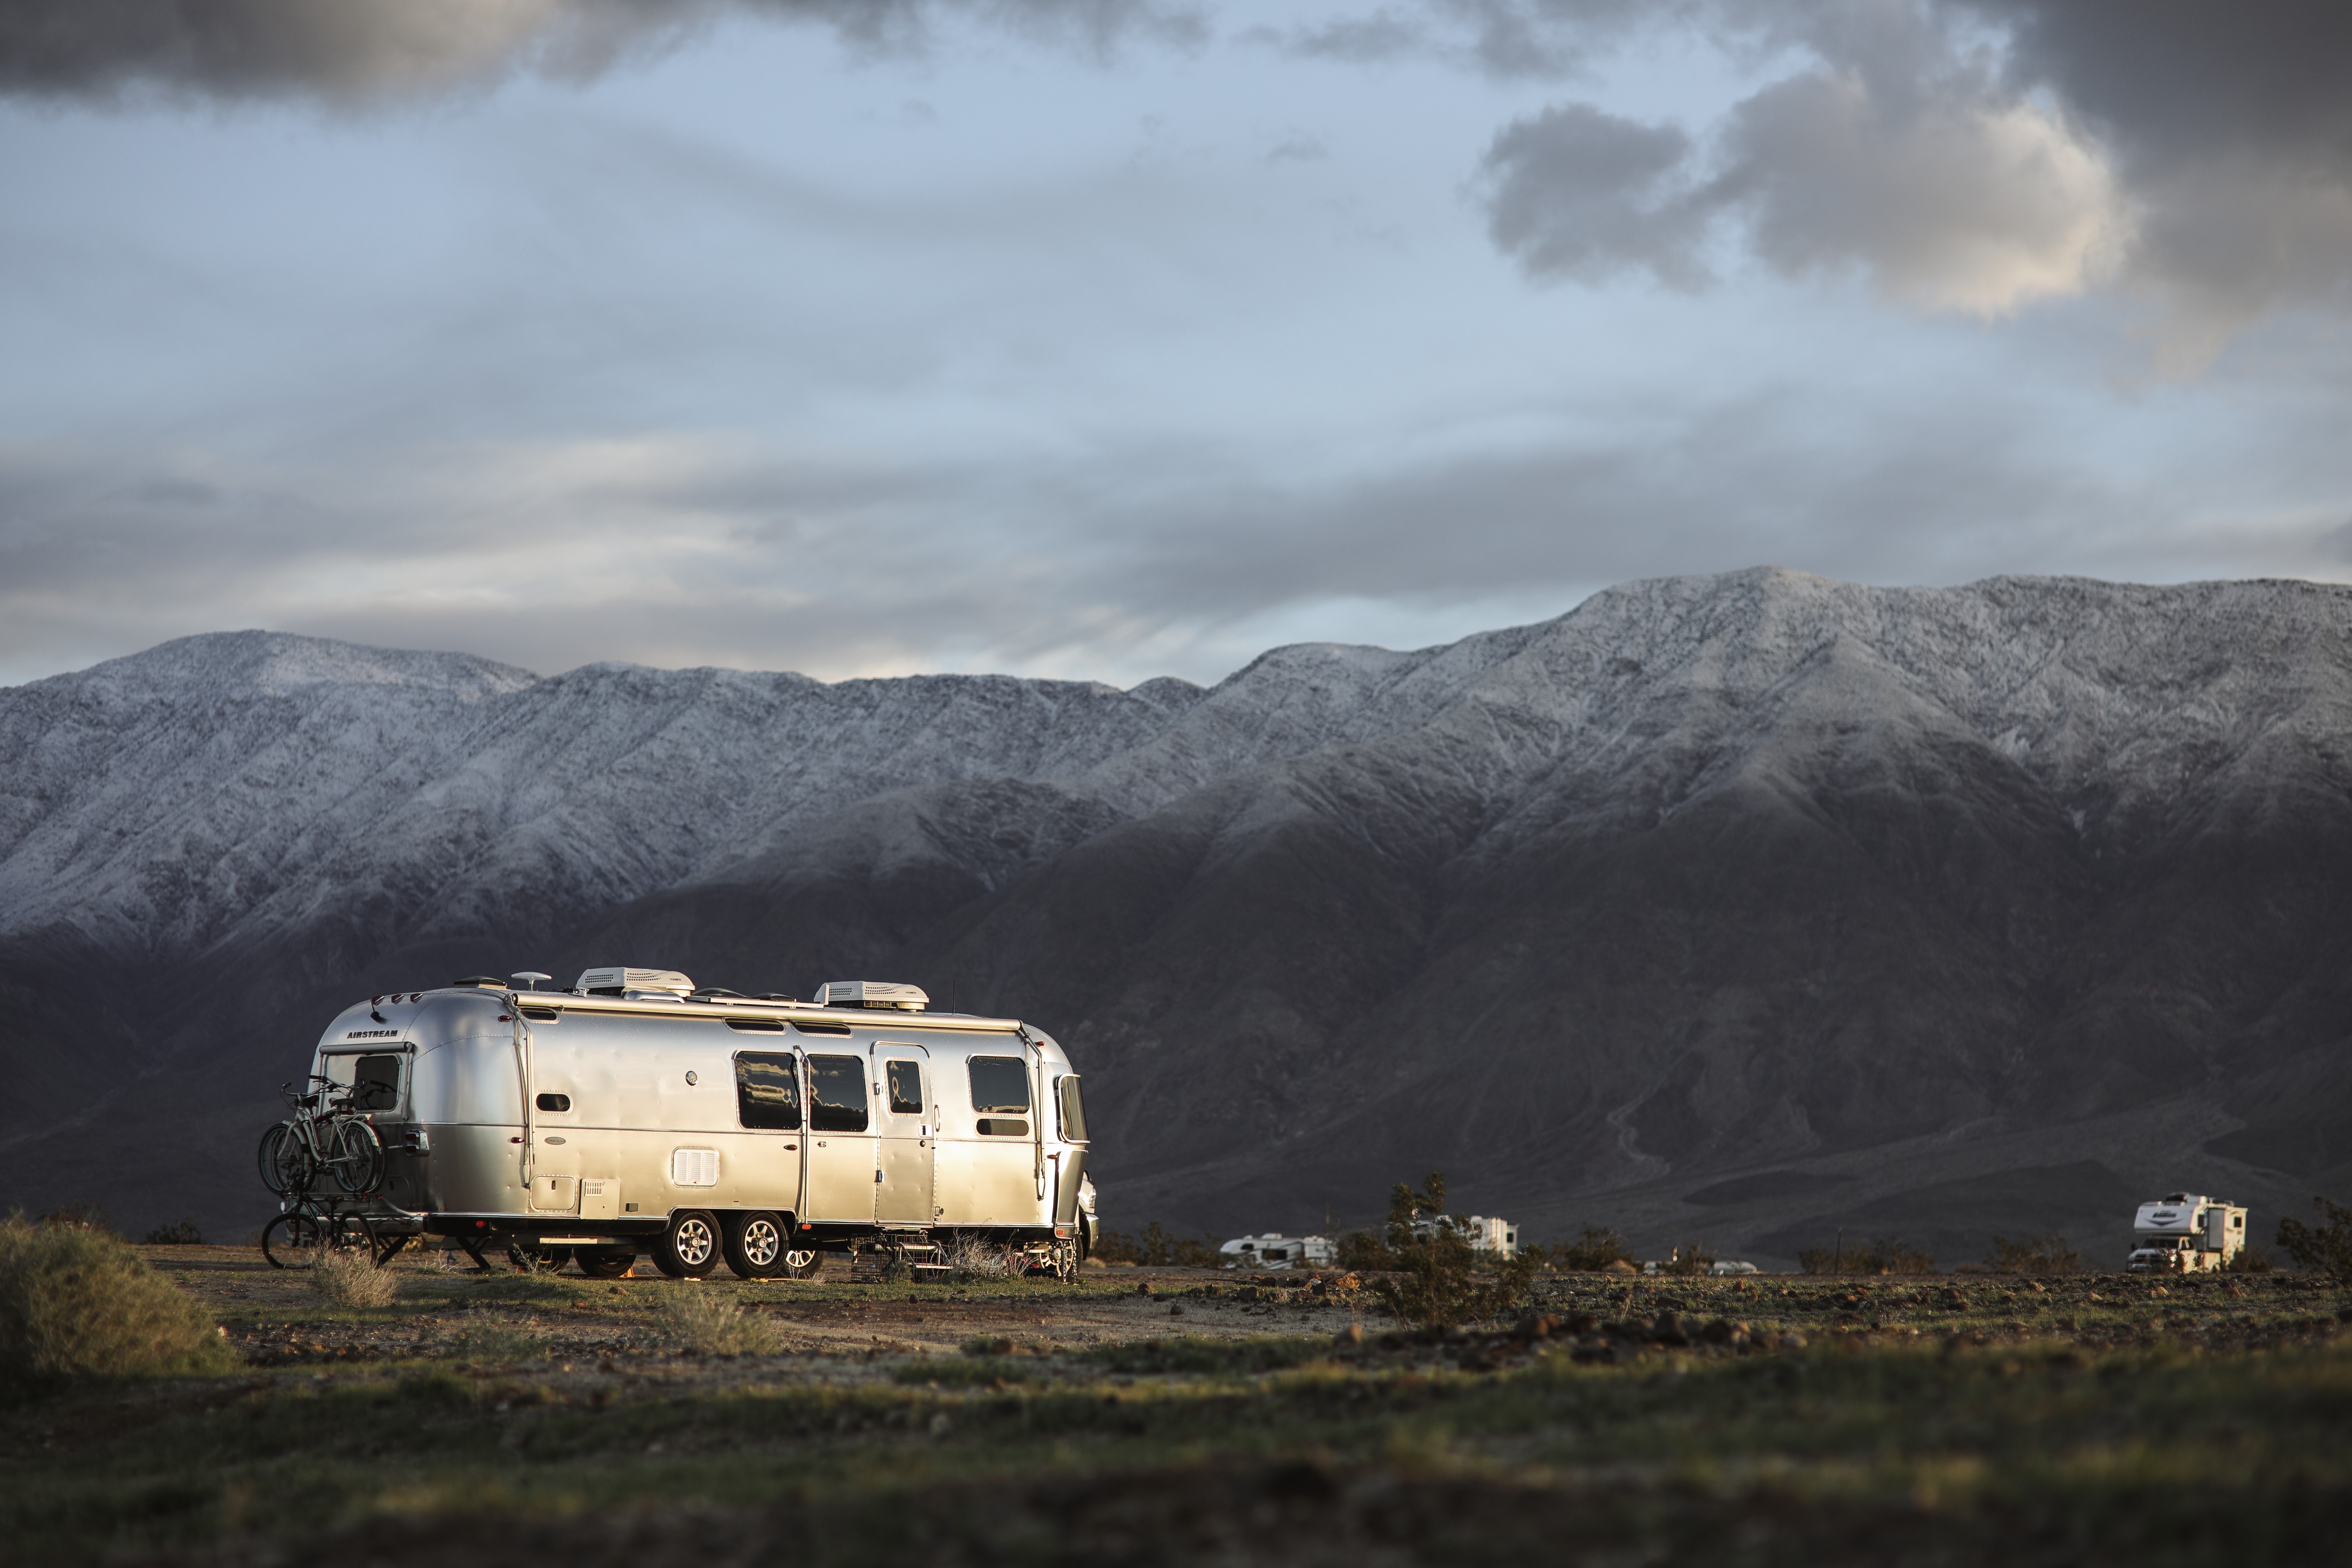 Karen Blue's Airstream boondocking out in the mountains